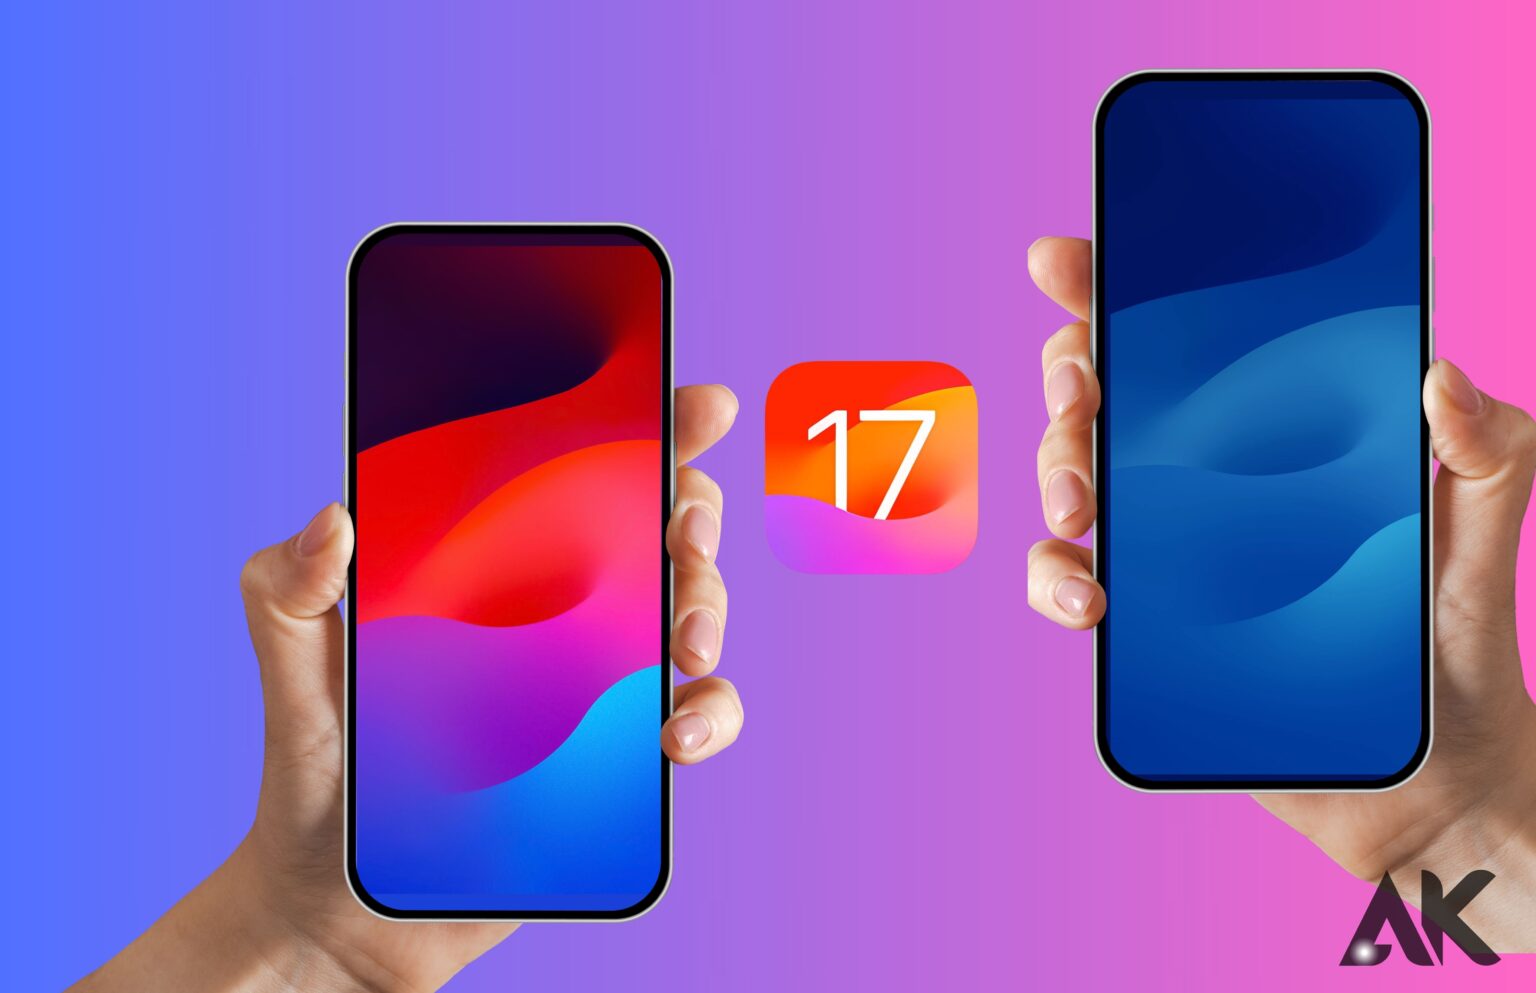 Stunning wallpapers for iOS 17